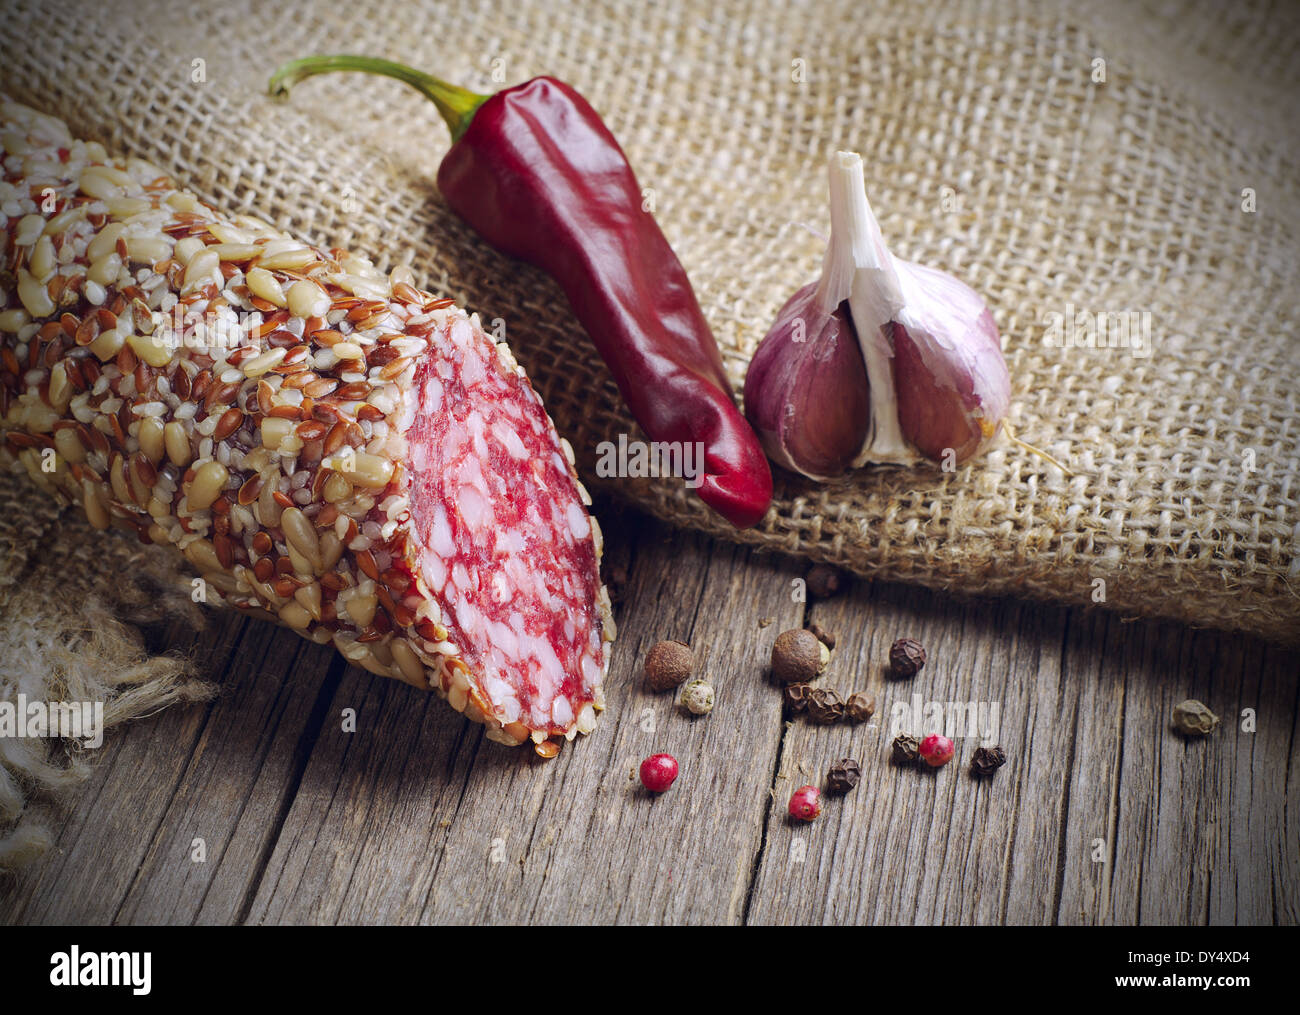 Piece of sausage with sunflower seeds, dry chili and garlic Stock Photo